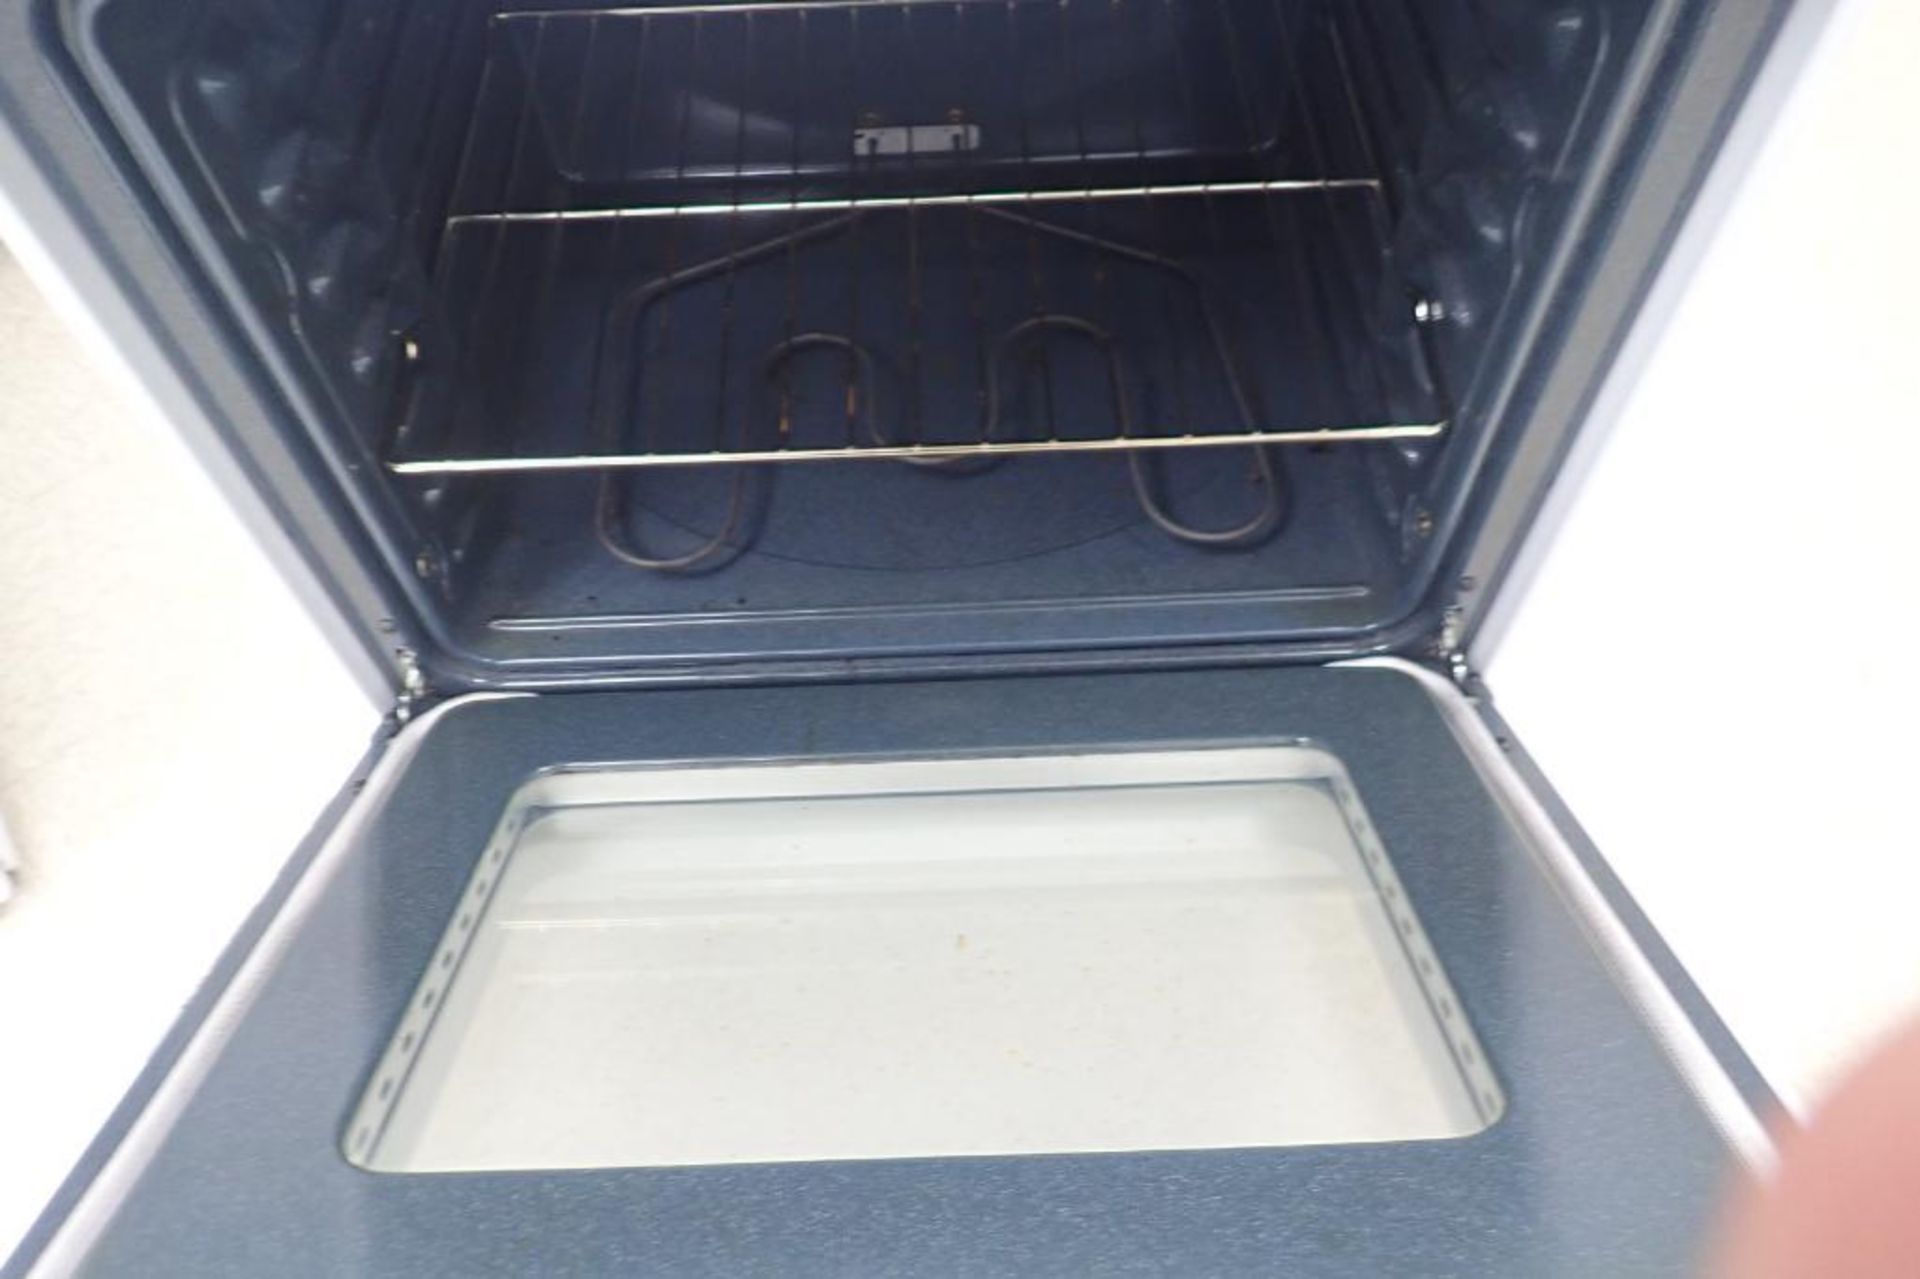 GE Spectra white coil range and oven combo - Image 7 of 10